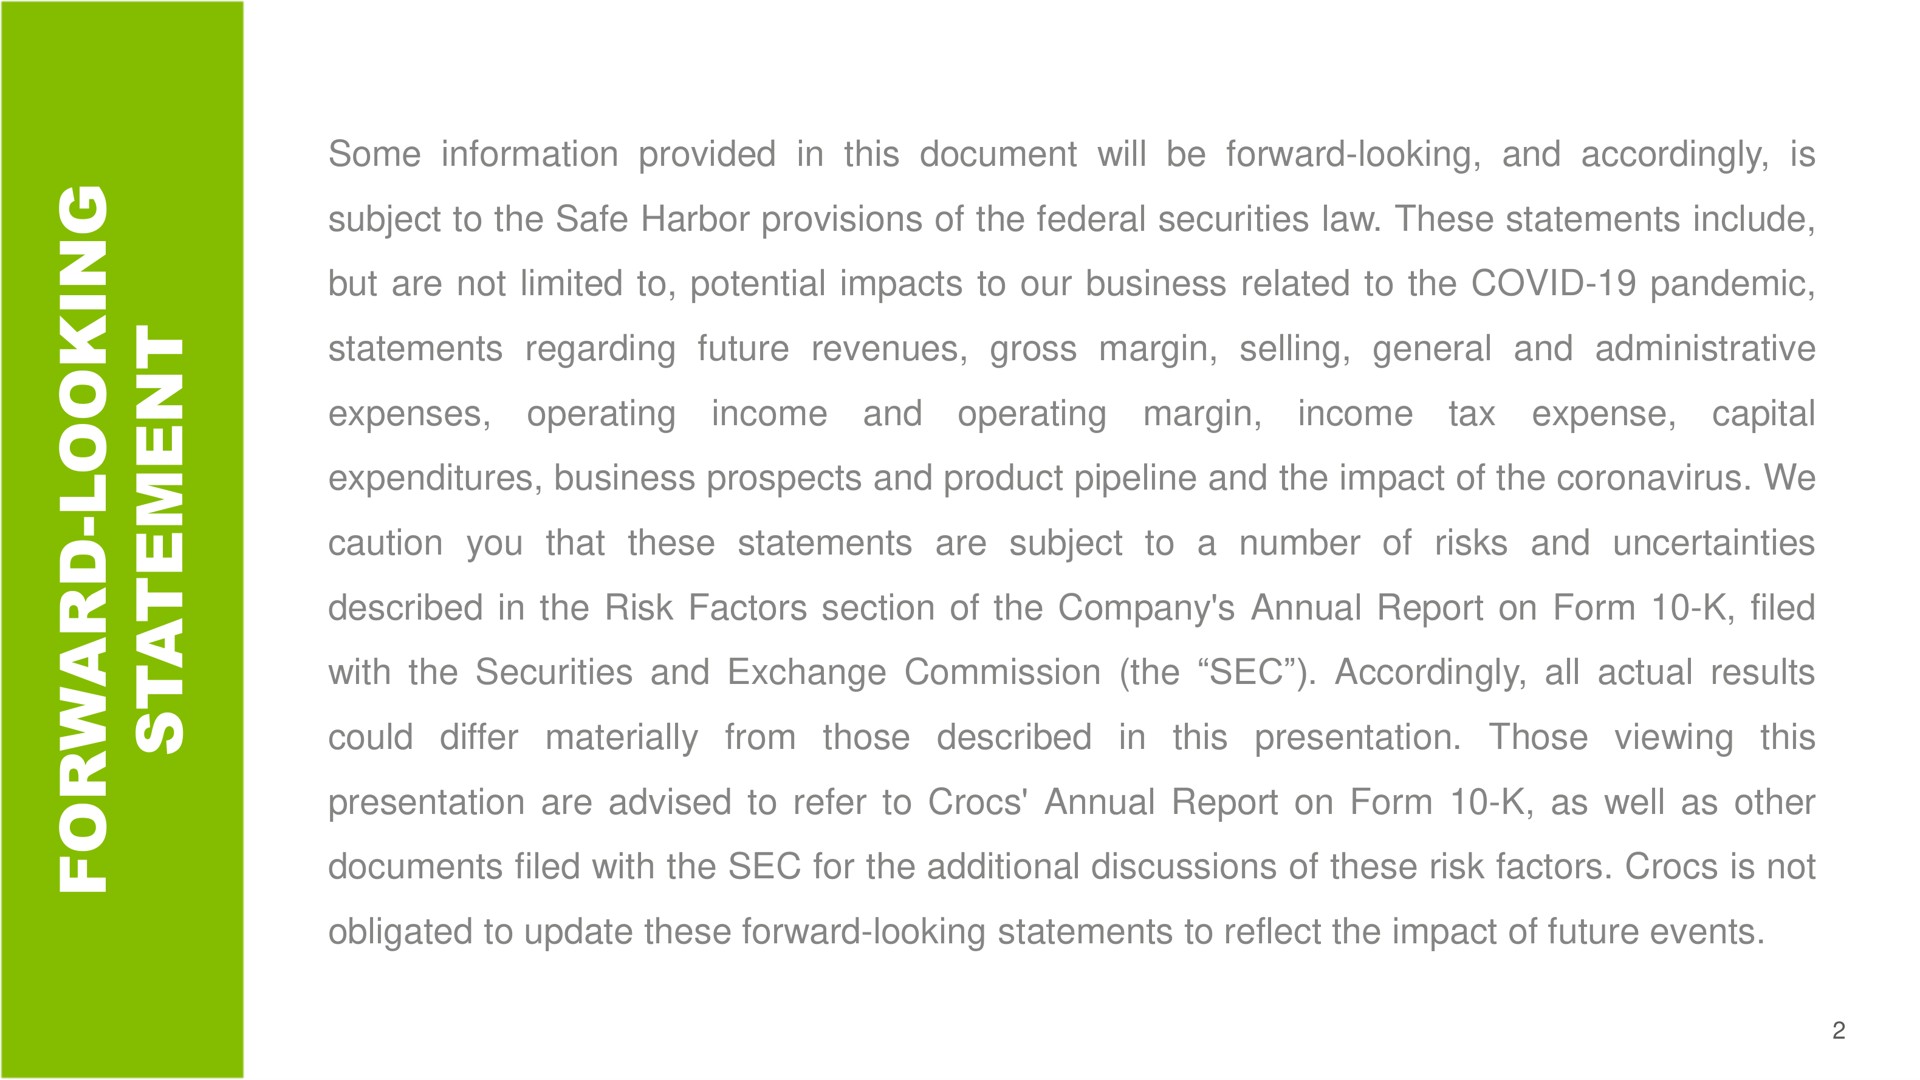 a a some information provided in this document will be forward looking and accordingly is subject to the safe harbor provisions of the federal securities law these statements include but are not limited to potential impacts to our business related to the covid pandemic statements regarding future revenues gross margin selling general and administrative expenses operating income and operating margin income tax expense capital expenditures business prospects and product pipeline and the impact of the we caution you that these statements are subject to number of risks and uncertainties described in the risk factors section of the company annual report on form filed with the securities and exchange commission the sec accordingly all actual results could differ materially from those described in this presentation those viewing this presentation are advised to refer to annual report on form as well as other documents filed with the sec for the additional discussions of these risk factors is not obligated to update these forward looking statements to reflect the impact of future events as nat | Crocs